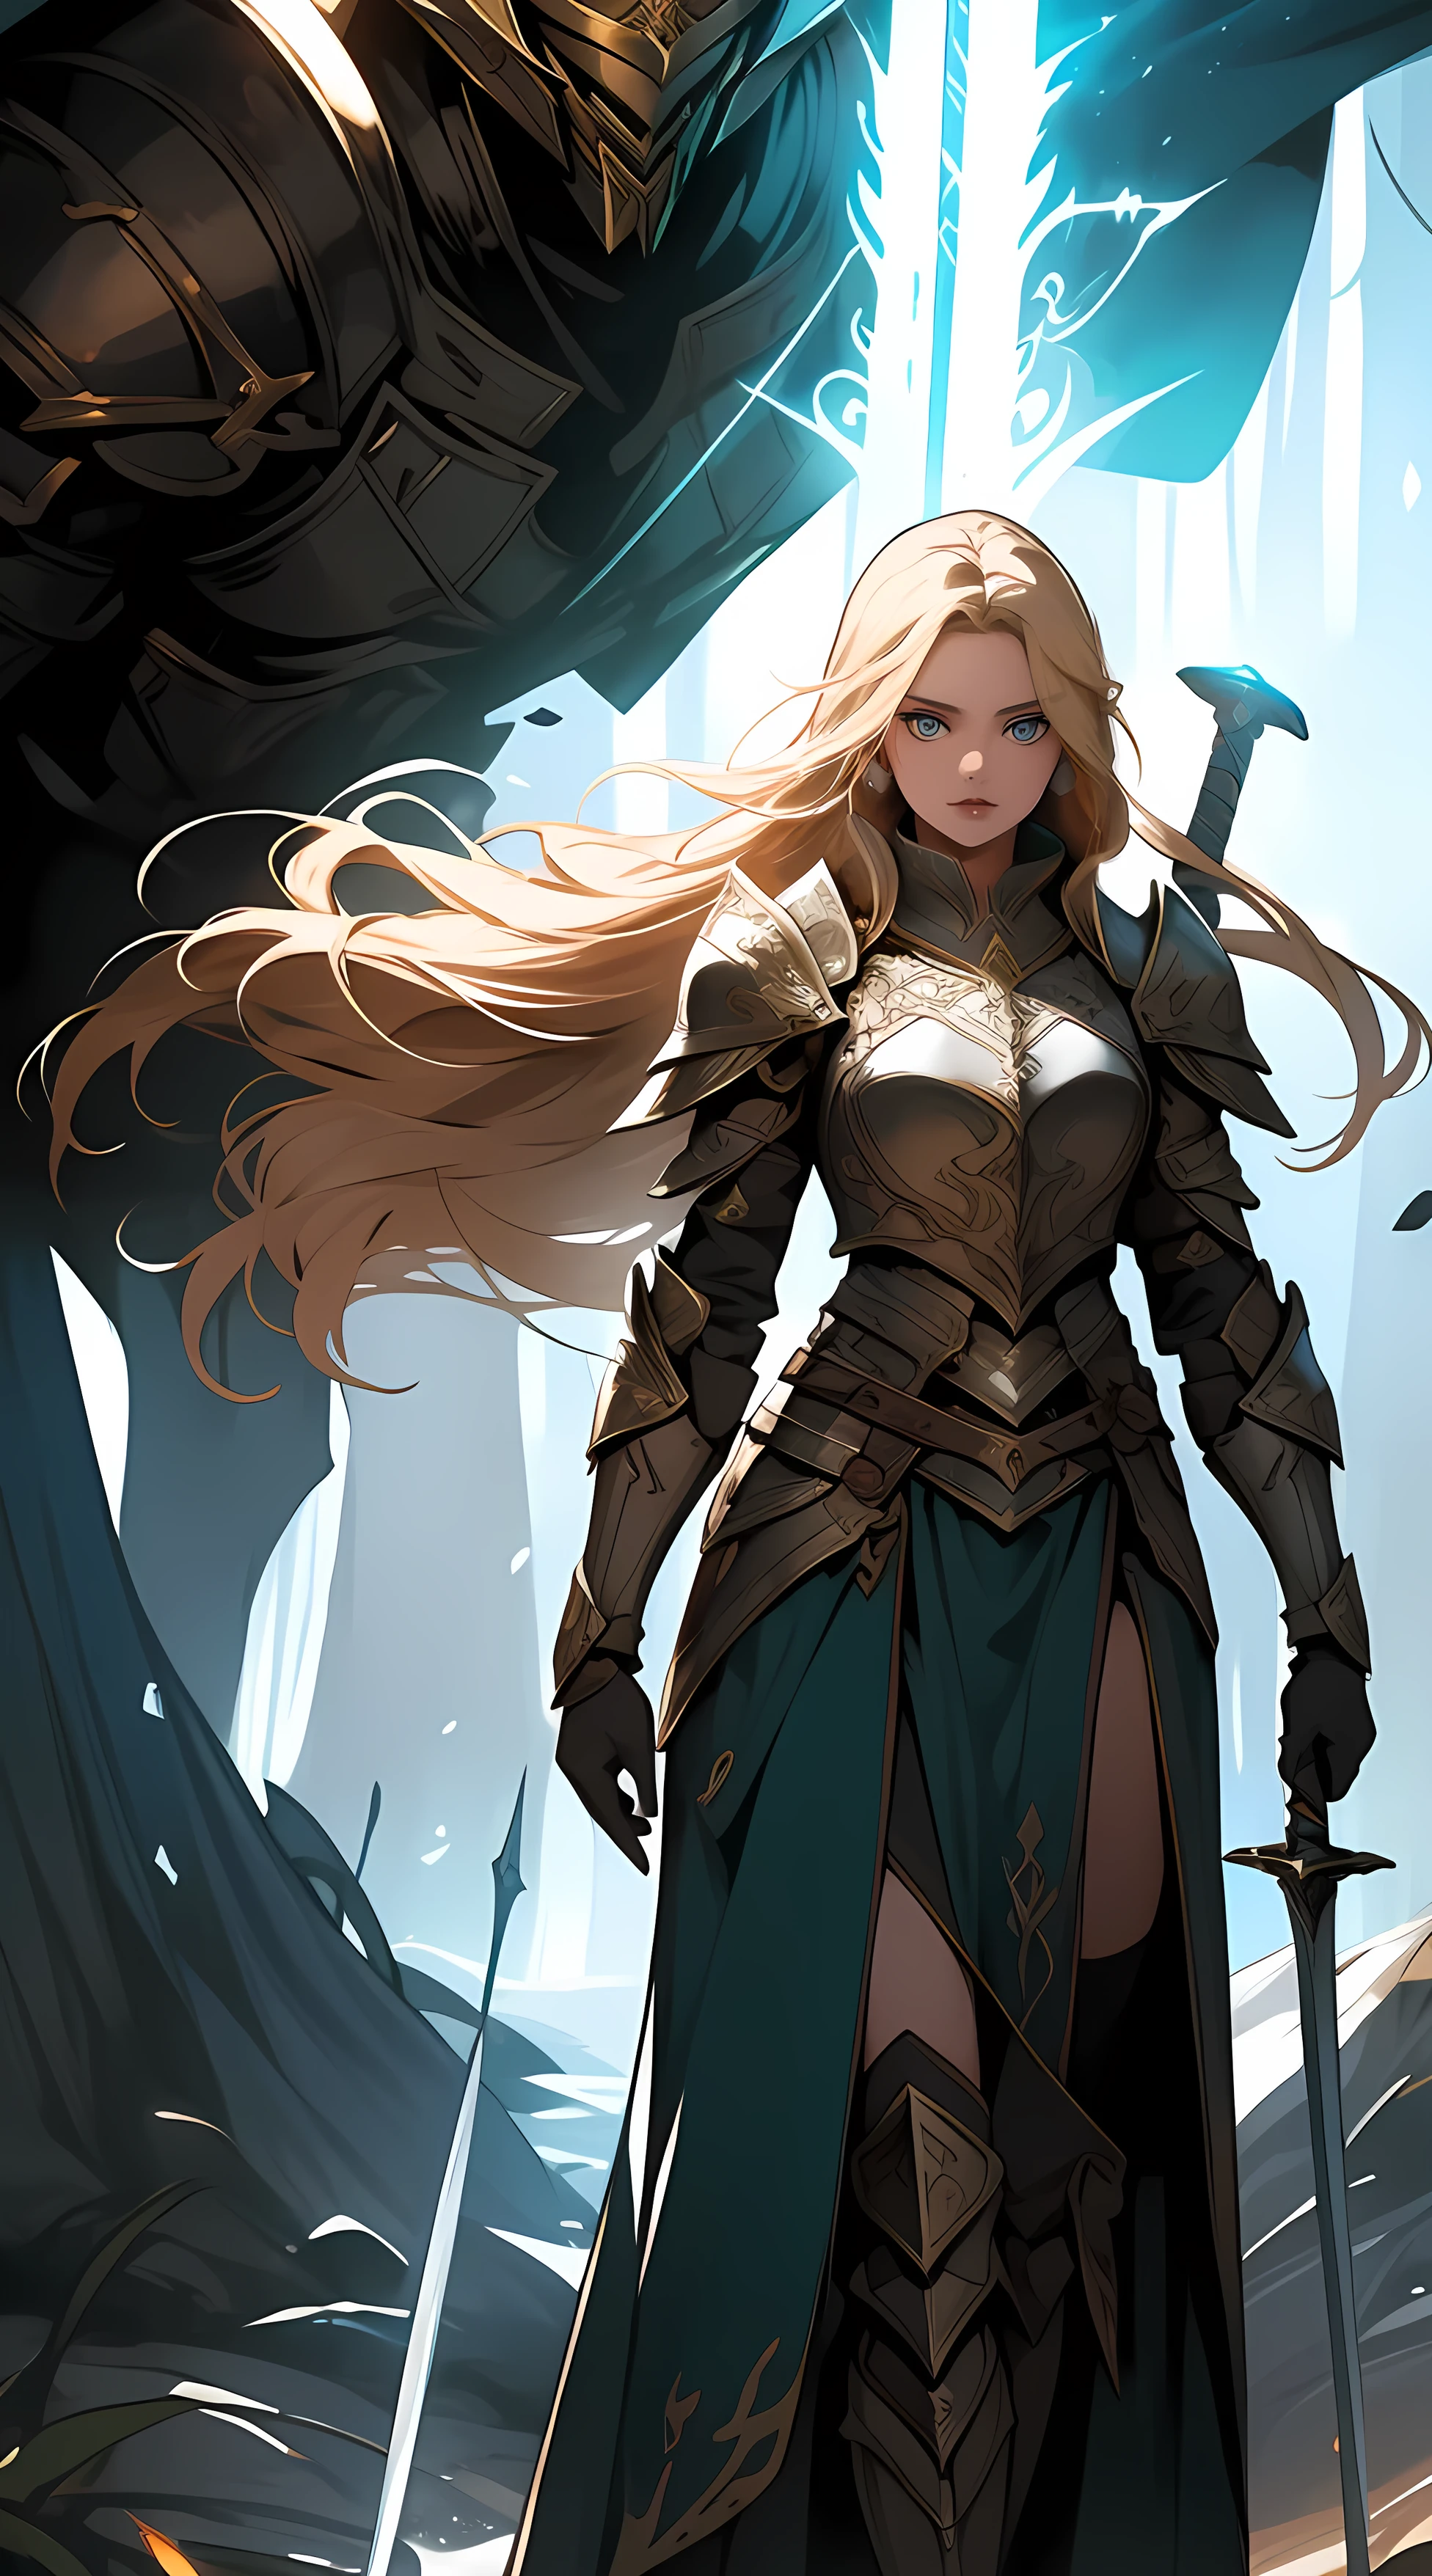 fantasy, epic, movie poster-style illustration, a girl standing in armor, with a dynamic and magical background, featuring prominent and well-designed typography elements,standing, confident, determined, wielding a sword, epic title, magical forest, glowing runes, bold text
